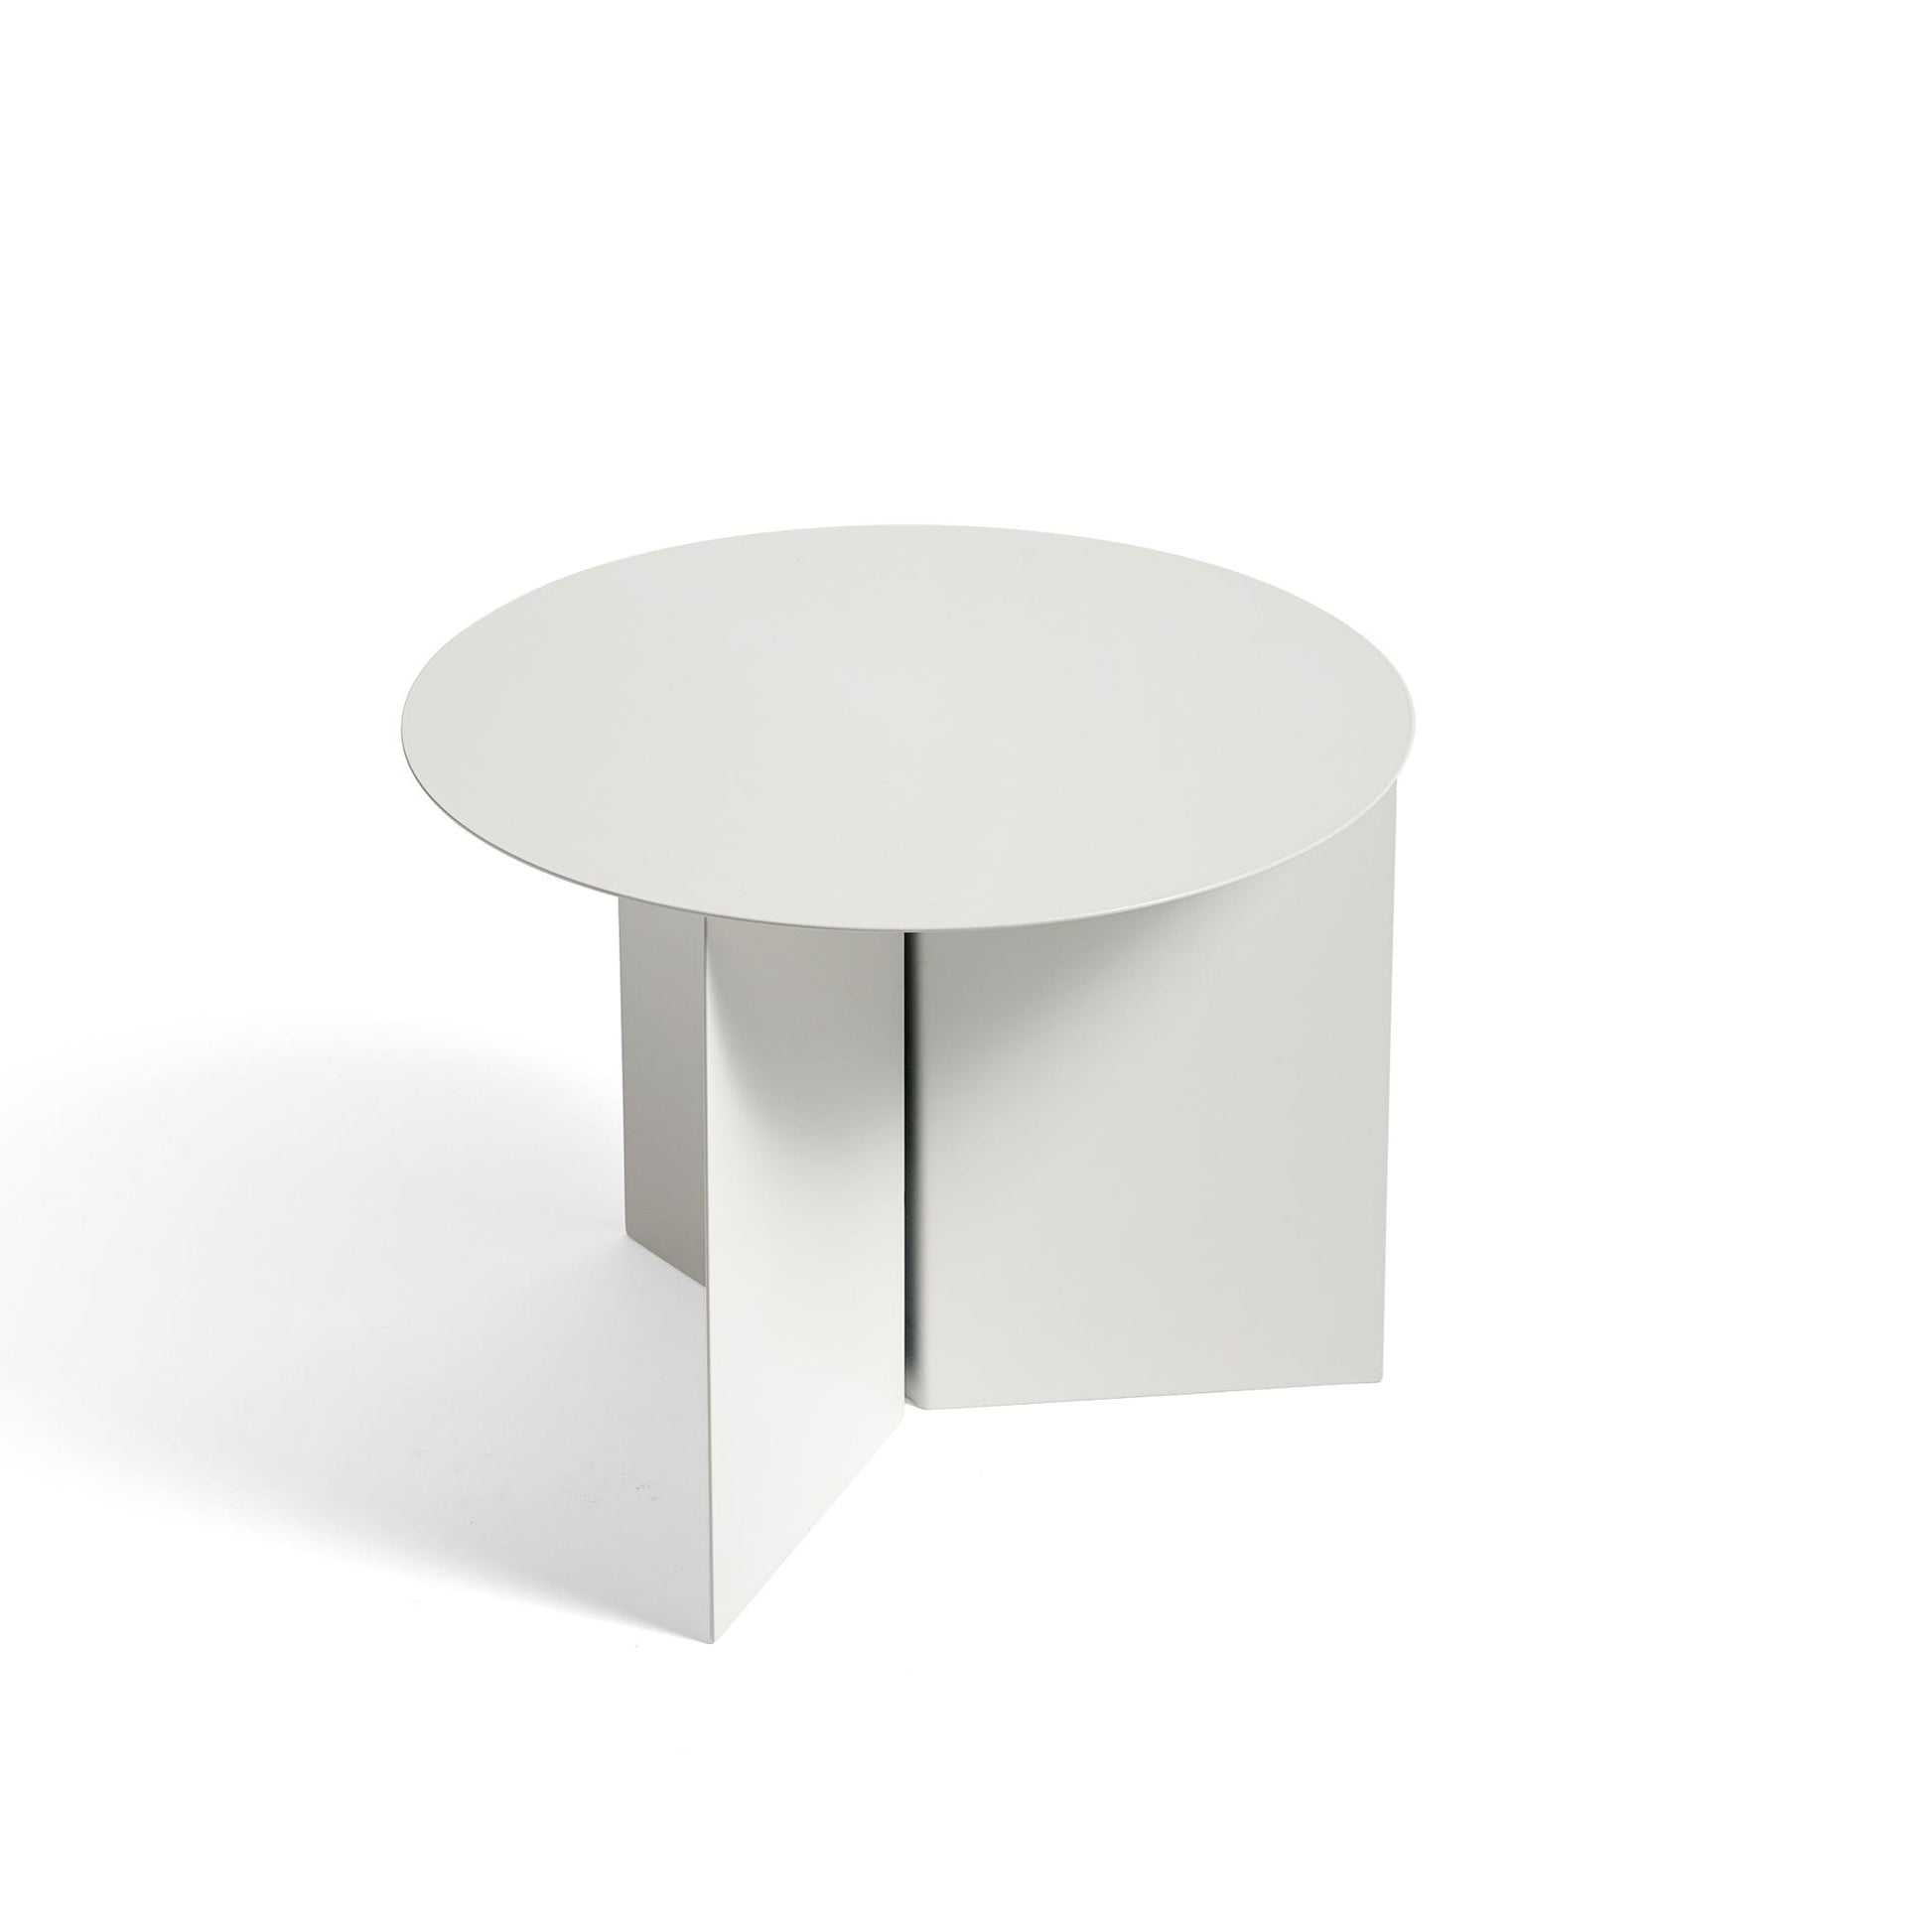 Slit Coffee Table Round Ø45 by HAY #White